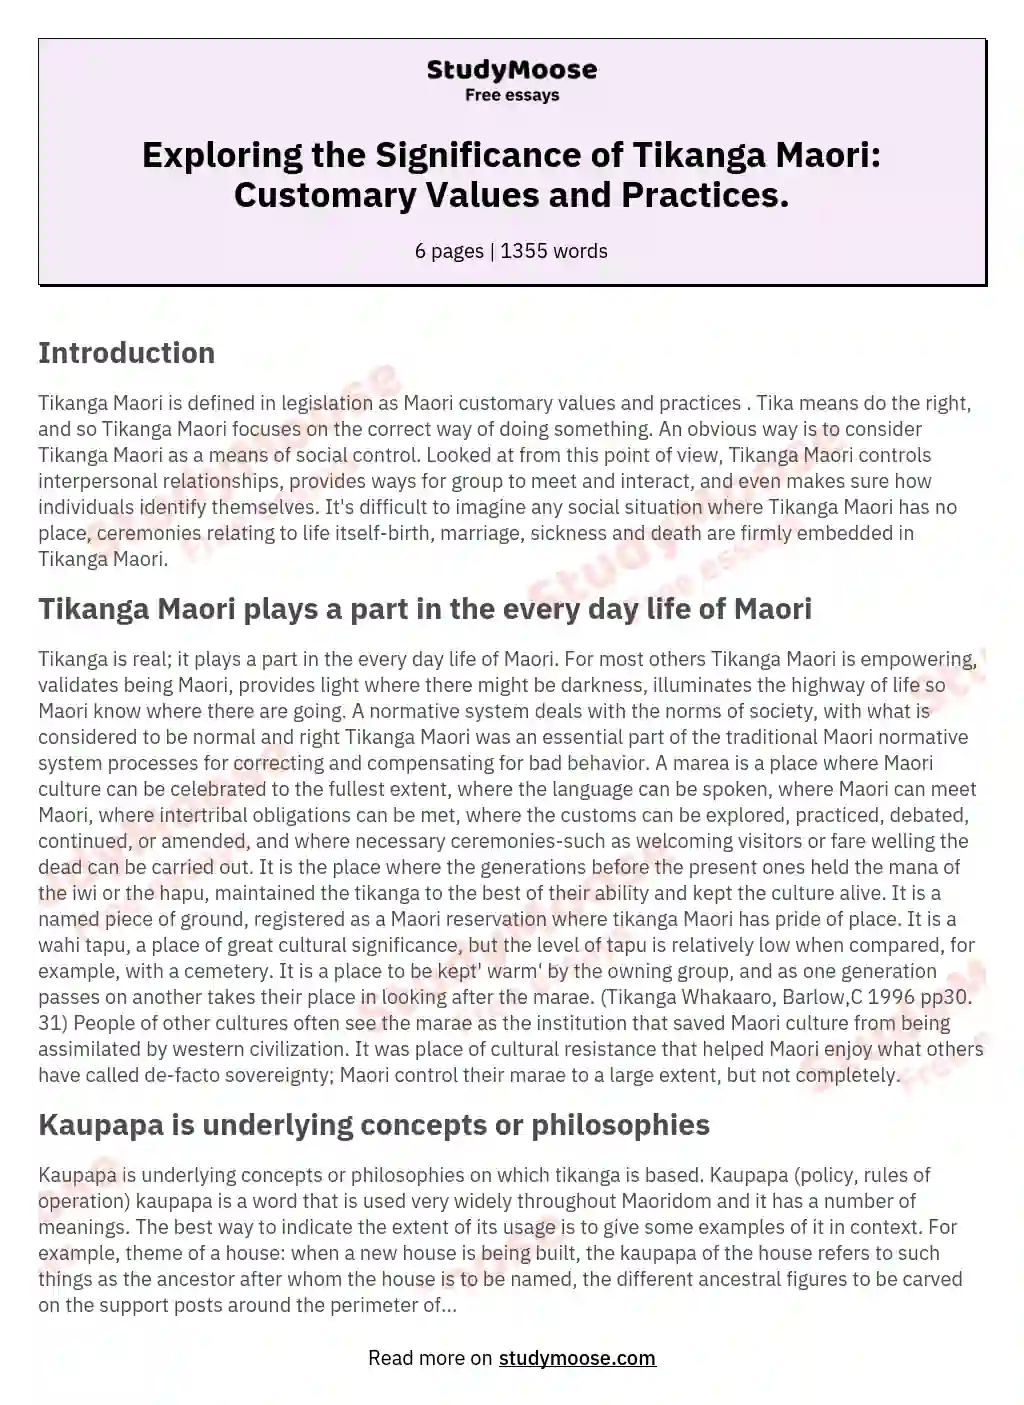 Exploring the Significance of Tikanga Maori: Customary Values and Practices. essay